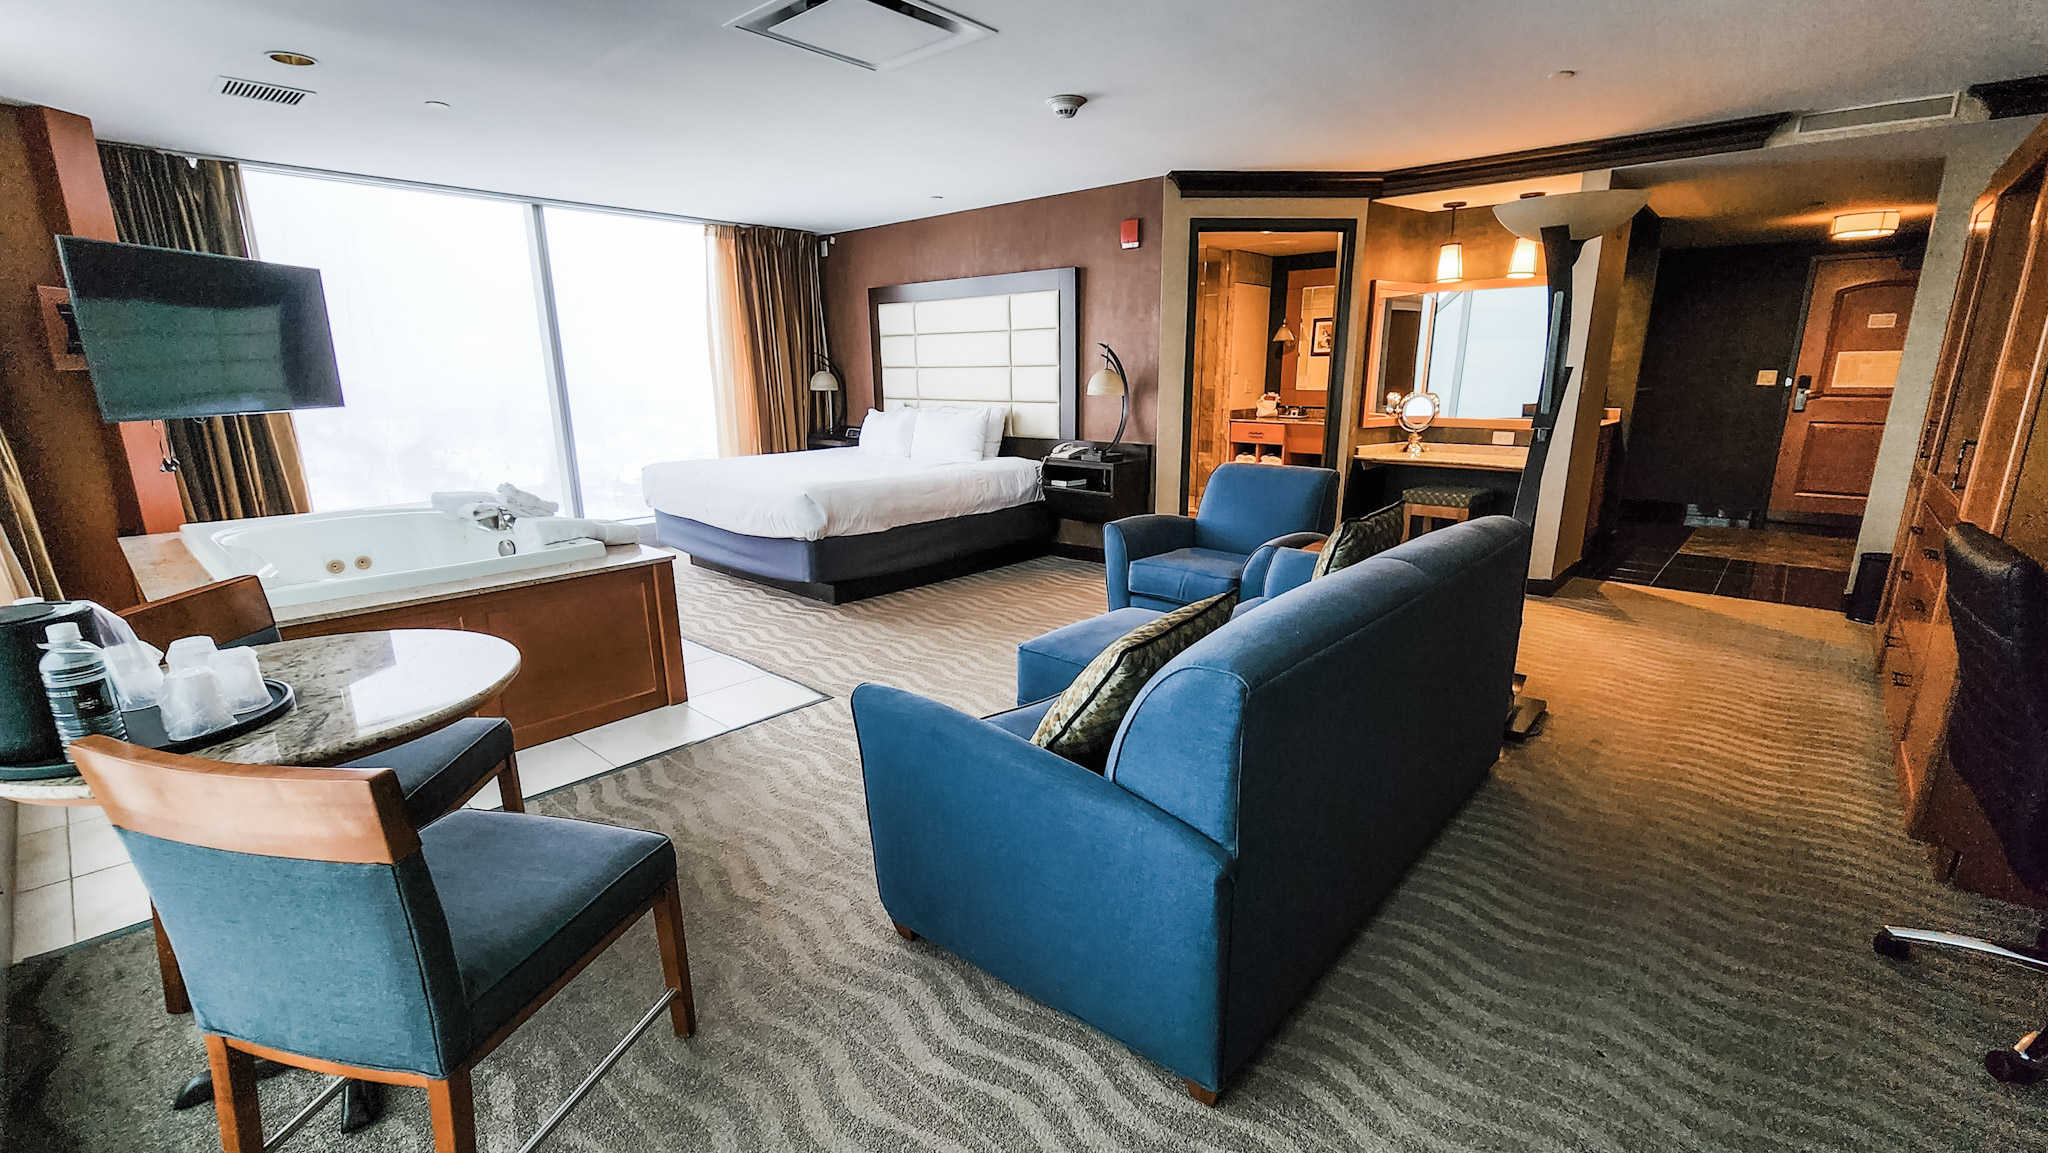 Another angle and full-view of the corner-suite at Seneca Niagara.